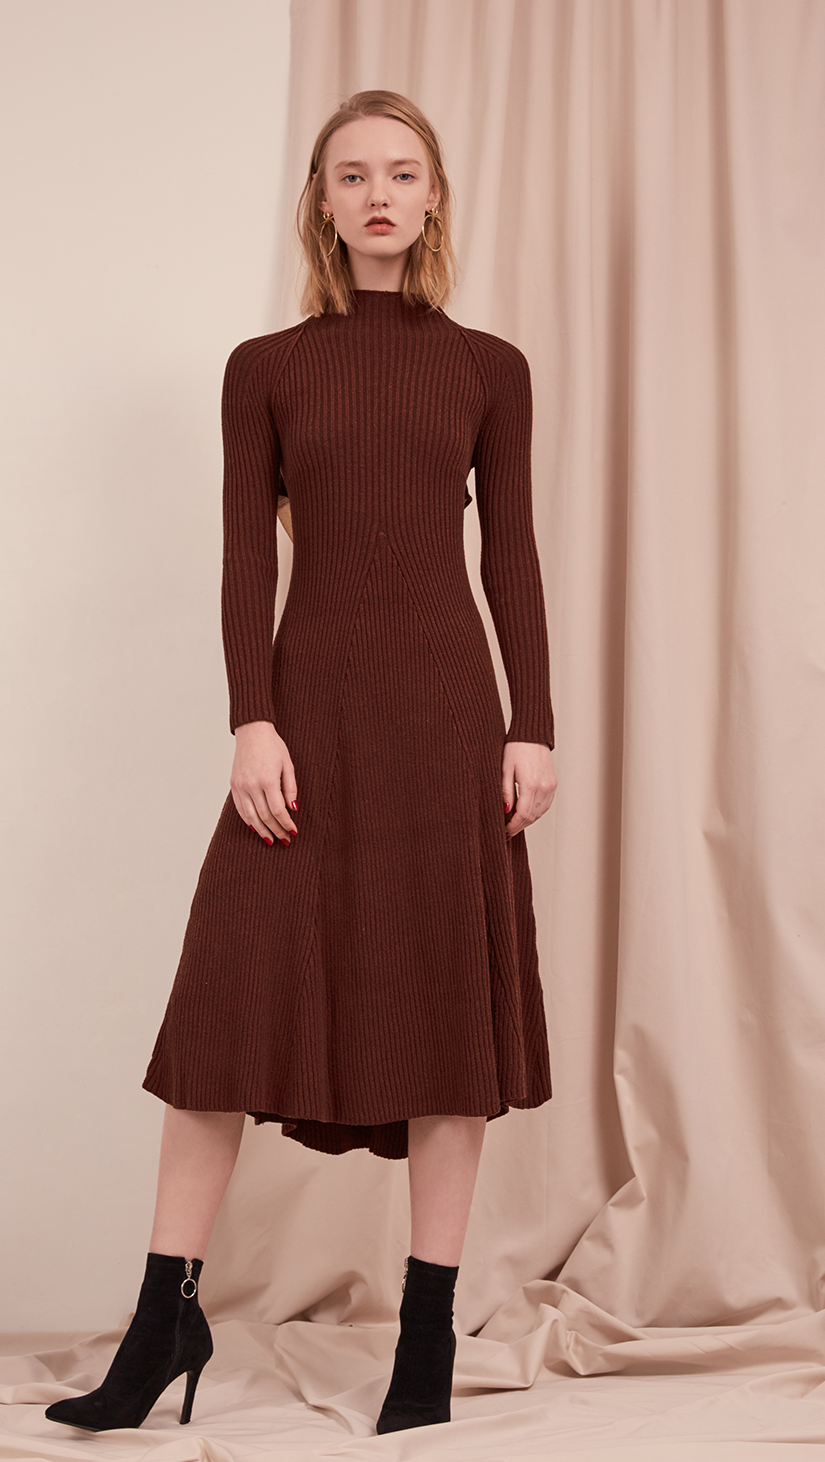 The Leila Dress in Dark Mocha. With ribbed midi dress with cut out back and white cotton tie open back. A-line shape. Slightly loose fit. Mid-weight. Stretchy fabric.